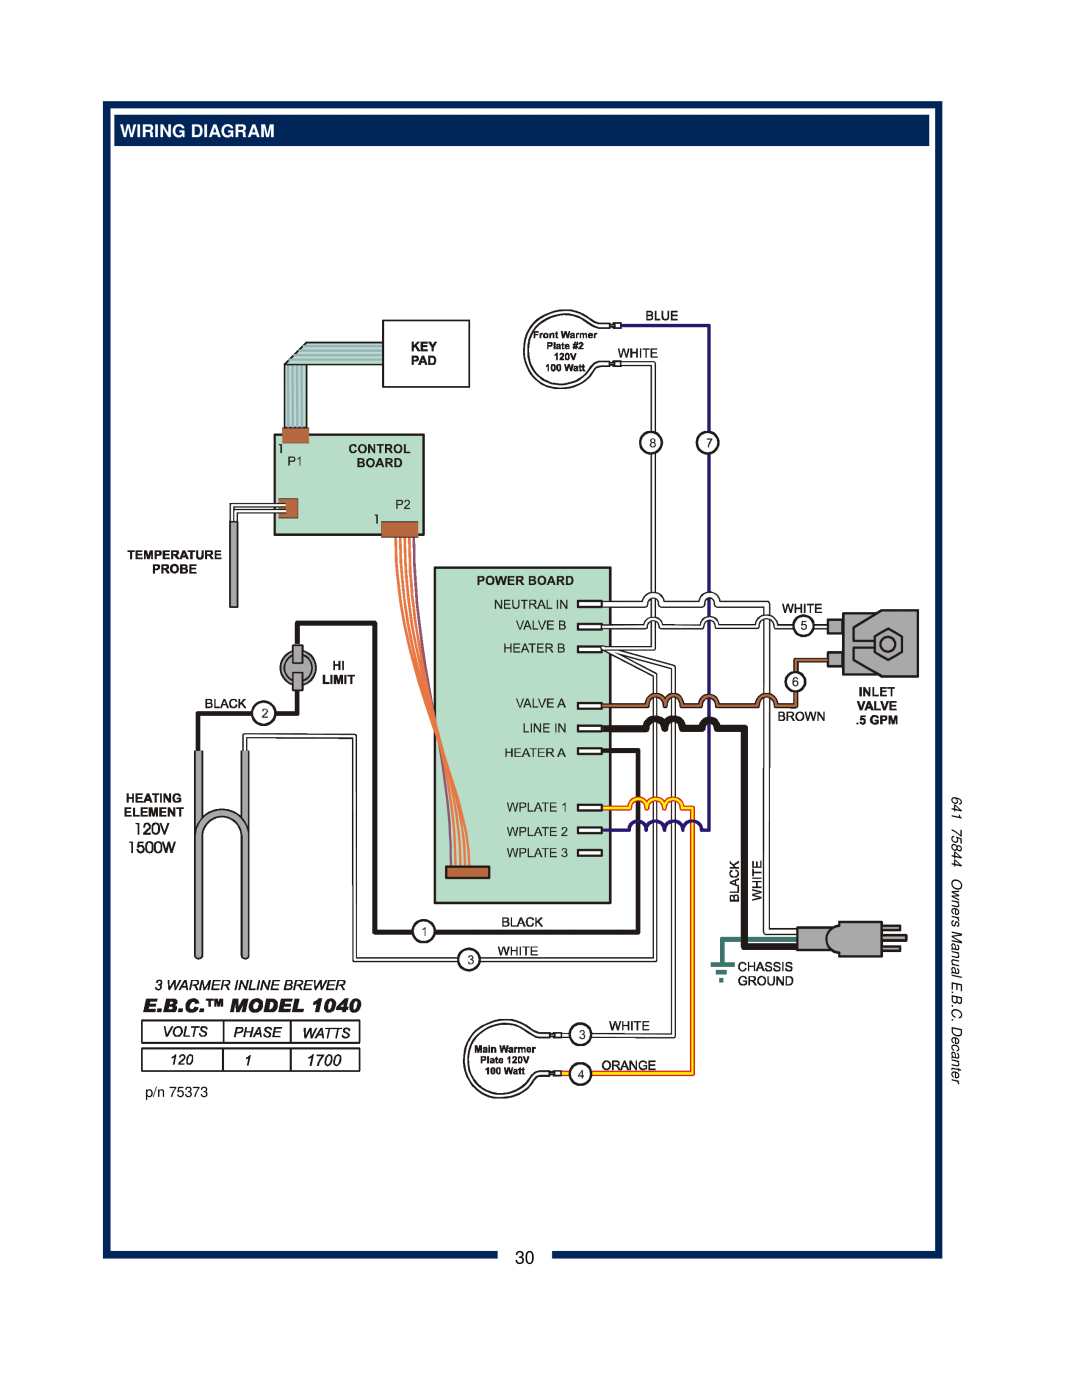 Bloomfield 1072, 1012, 1040 owner manual Wiring Diagram, Decanter, 75844, Owners Manual E.B.C 